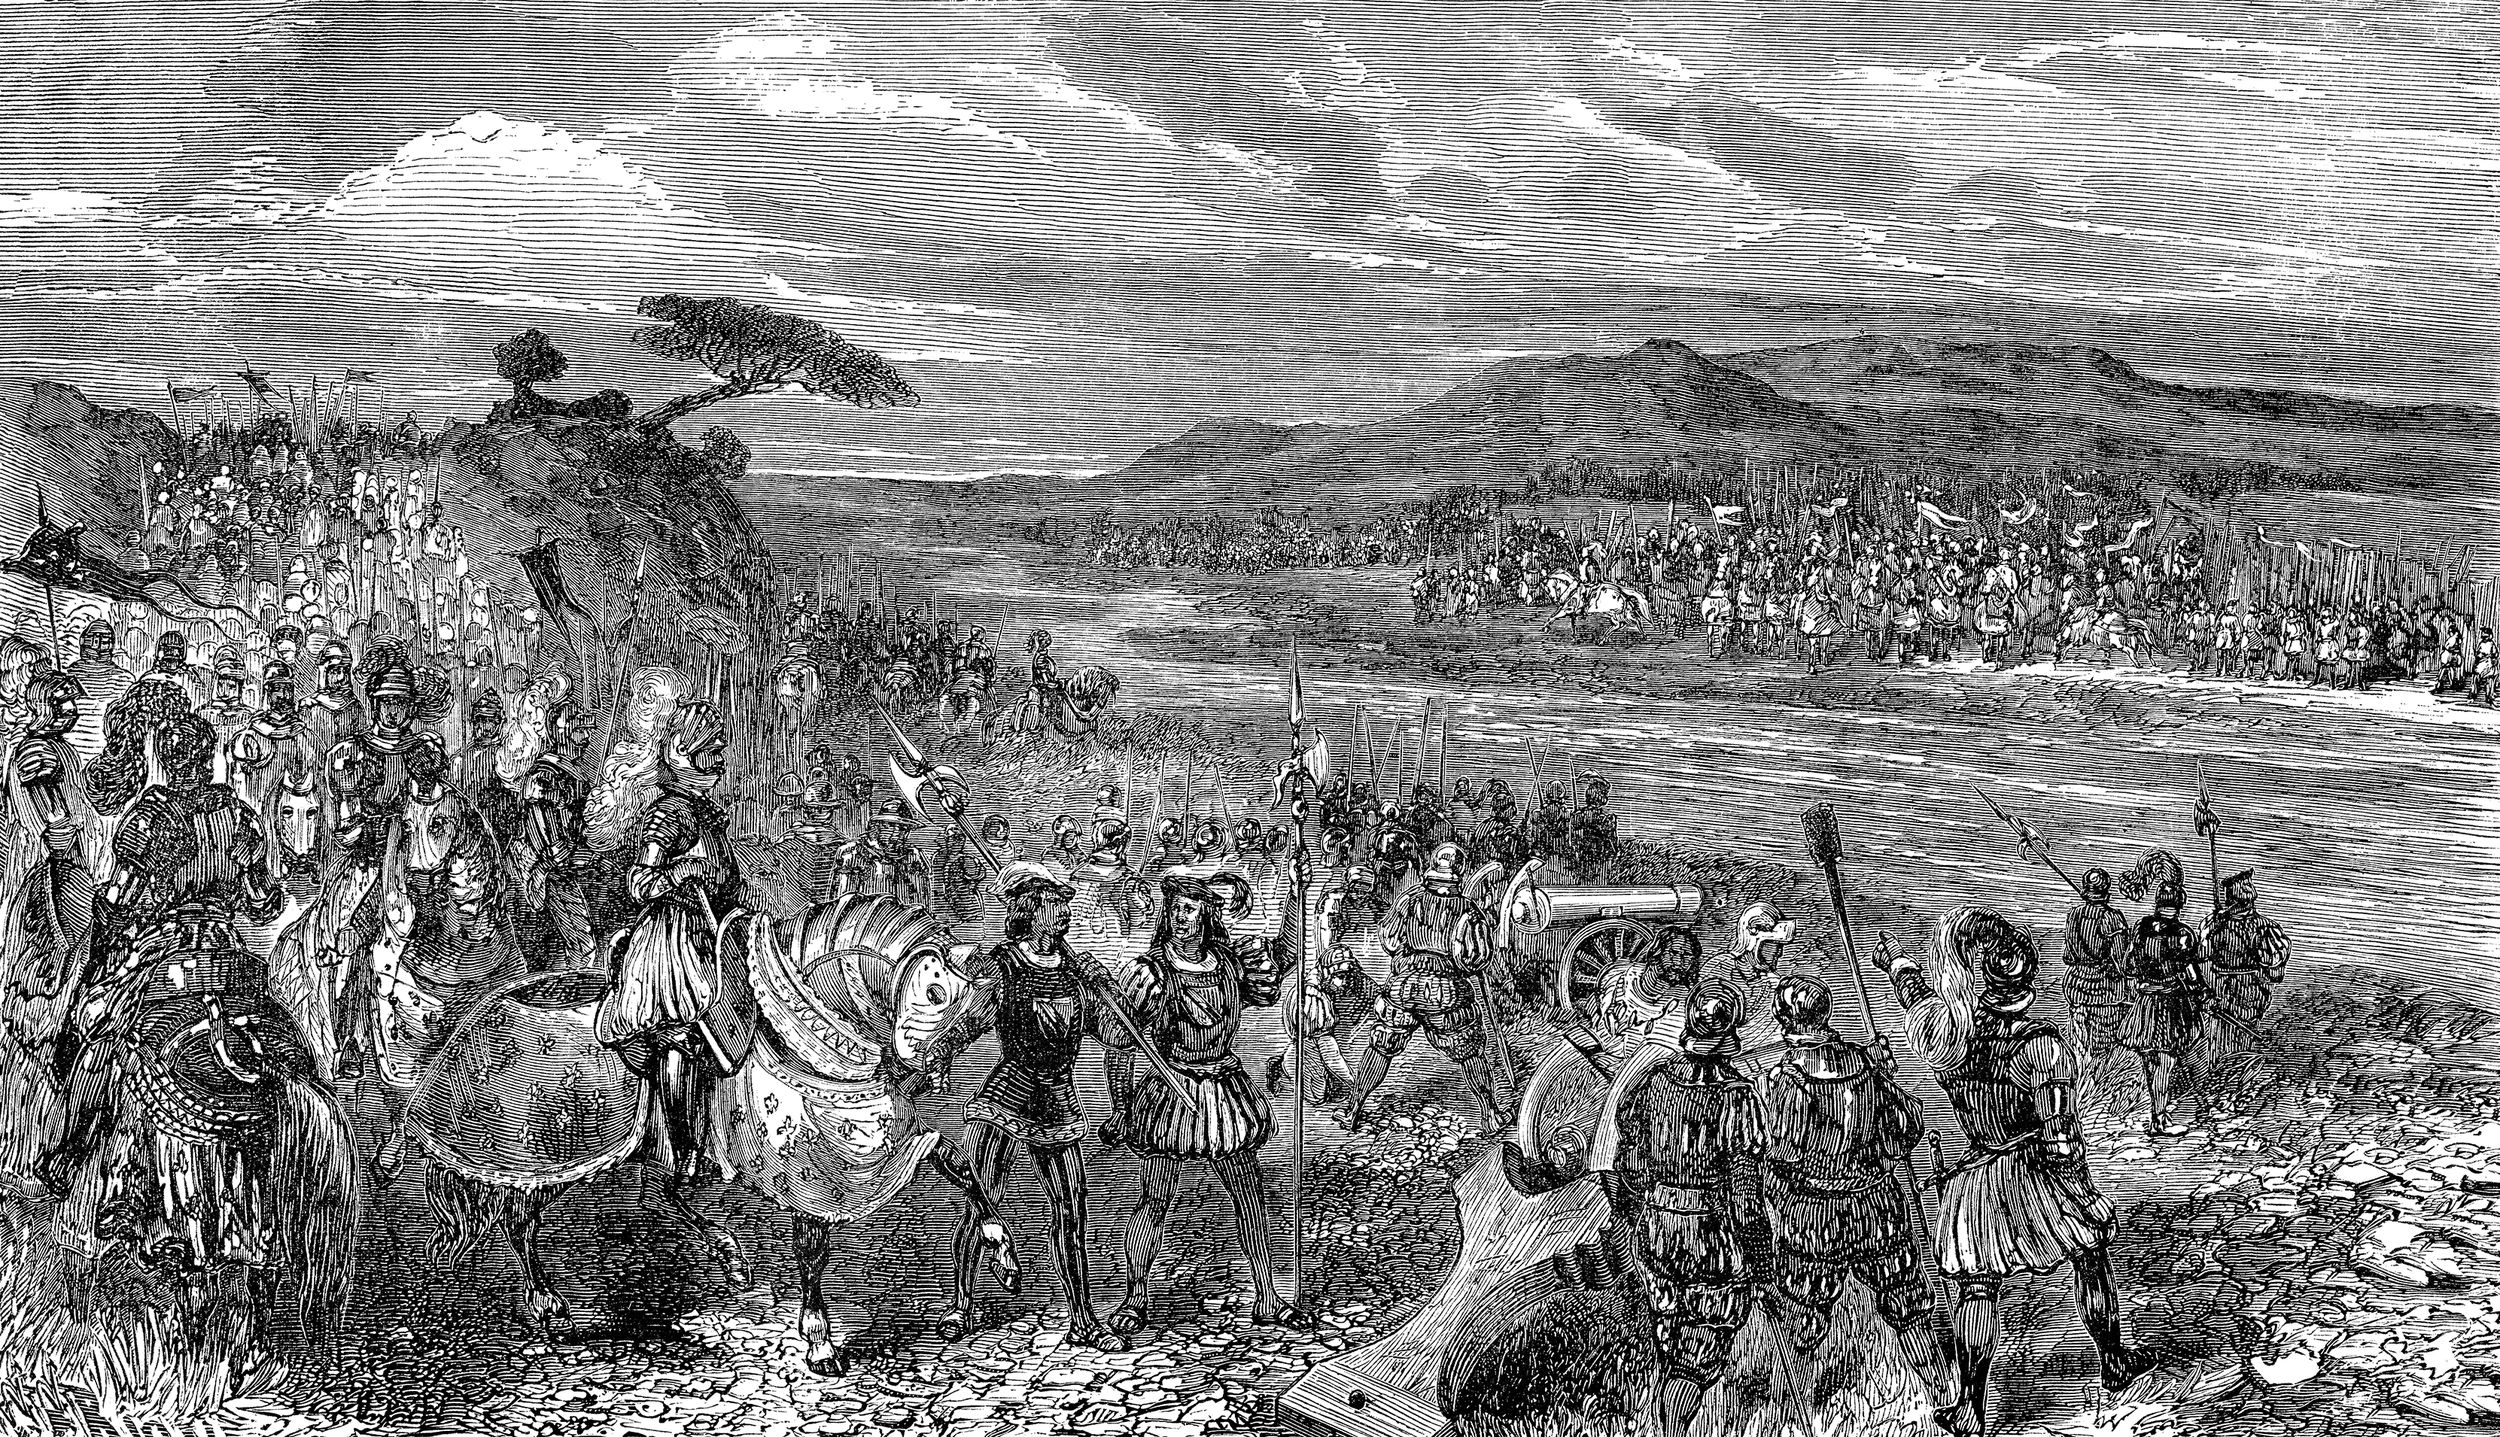 The French Army, estimated to include about 9,000 men, deploys for battle as they position their heavy cannon. Facing the French in the distance, Gonzaga prepares to send a force of some 2,300 cavalry, and 2,000 infantry to attack across the Toro River, swollen by rain the night before. 